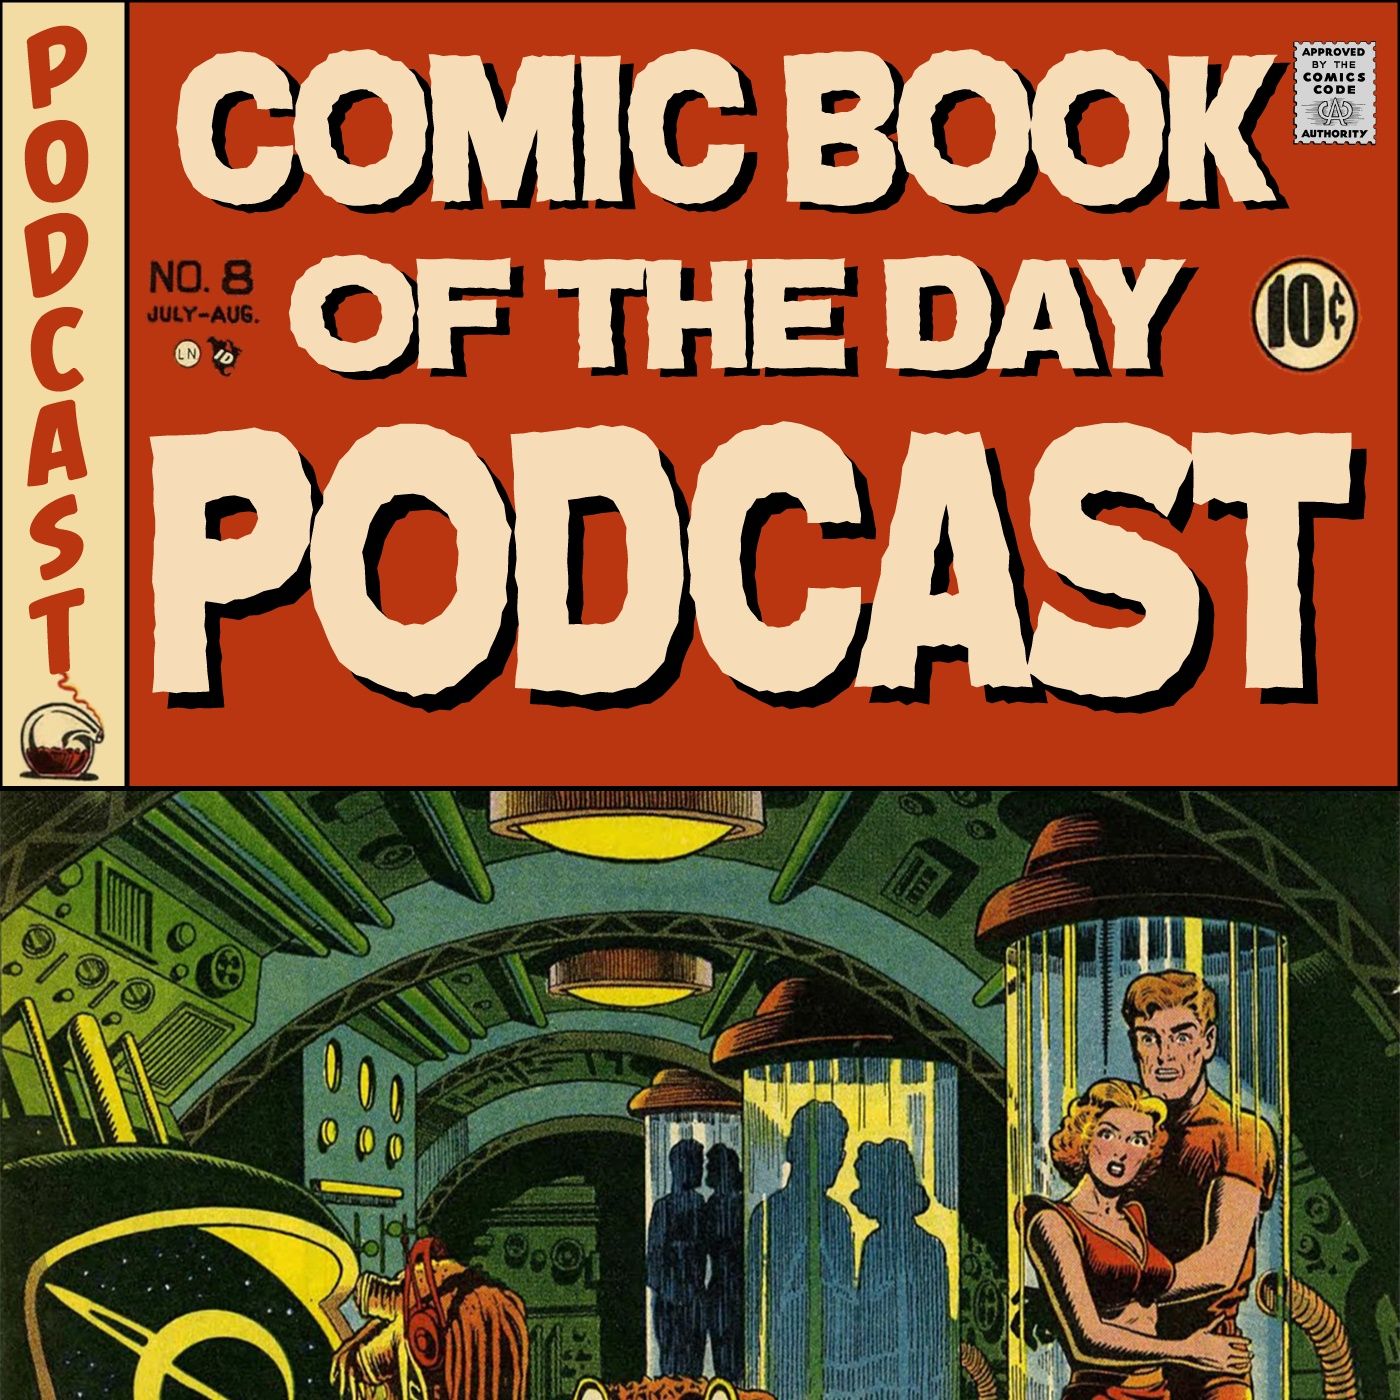 The Comic Book of the Day Podcast